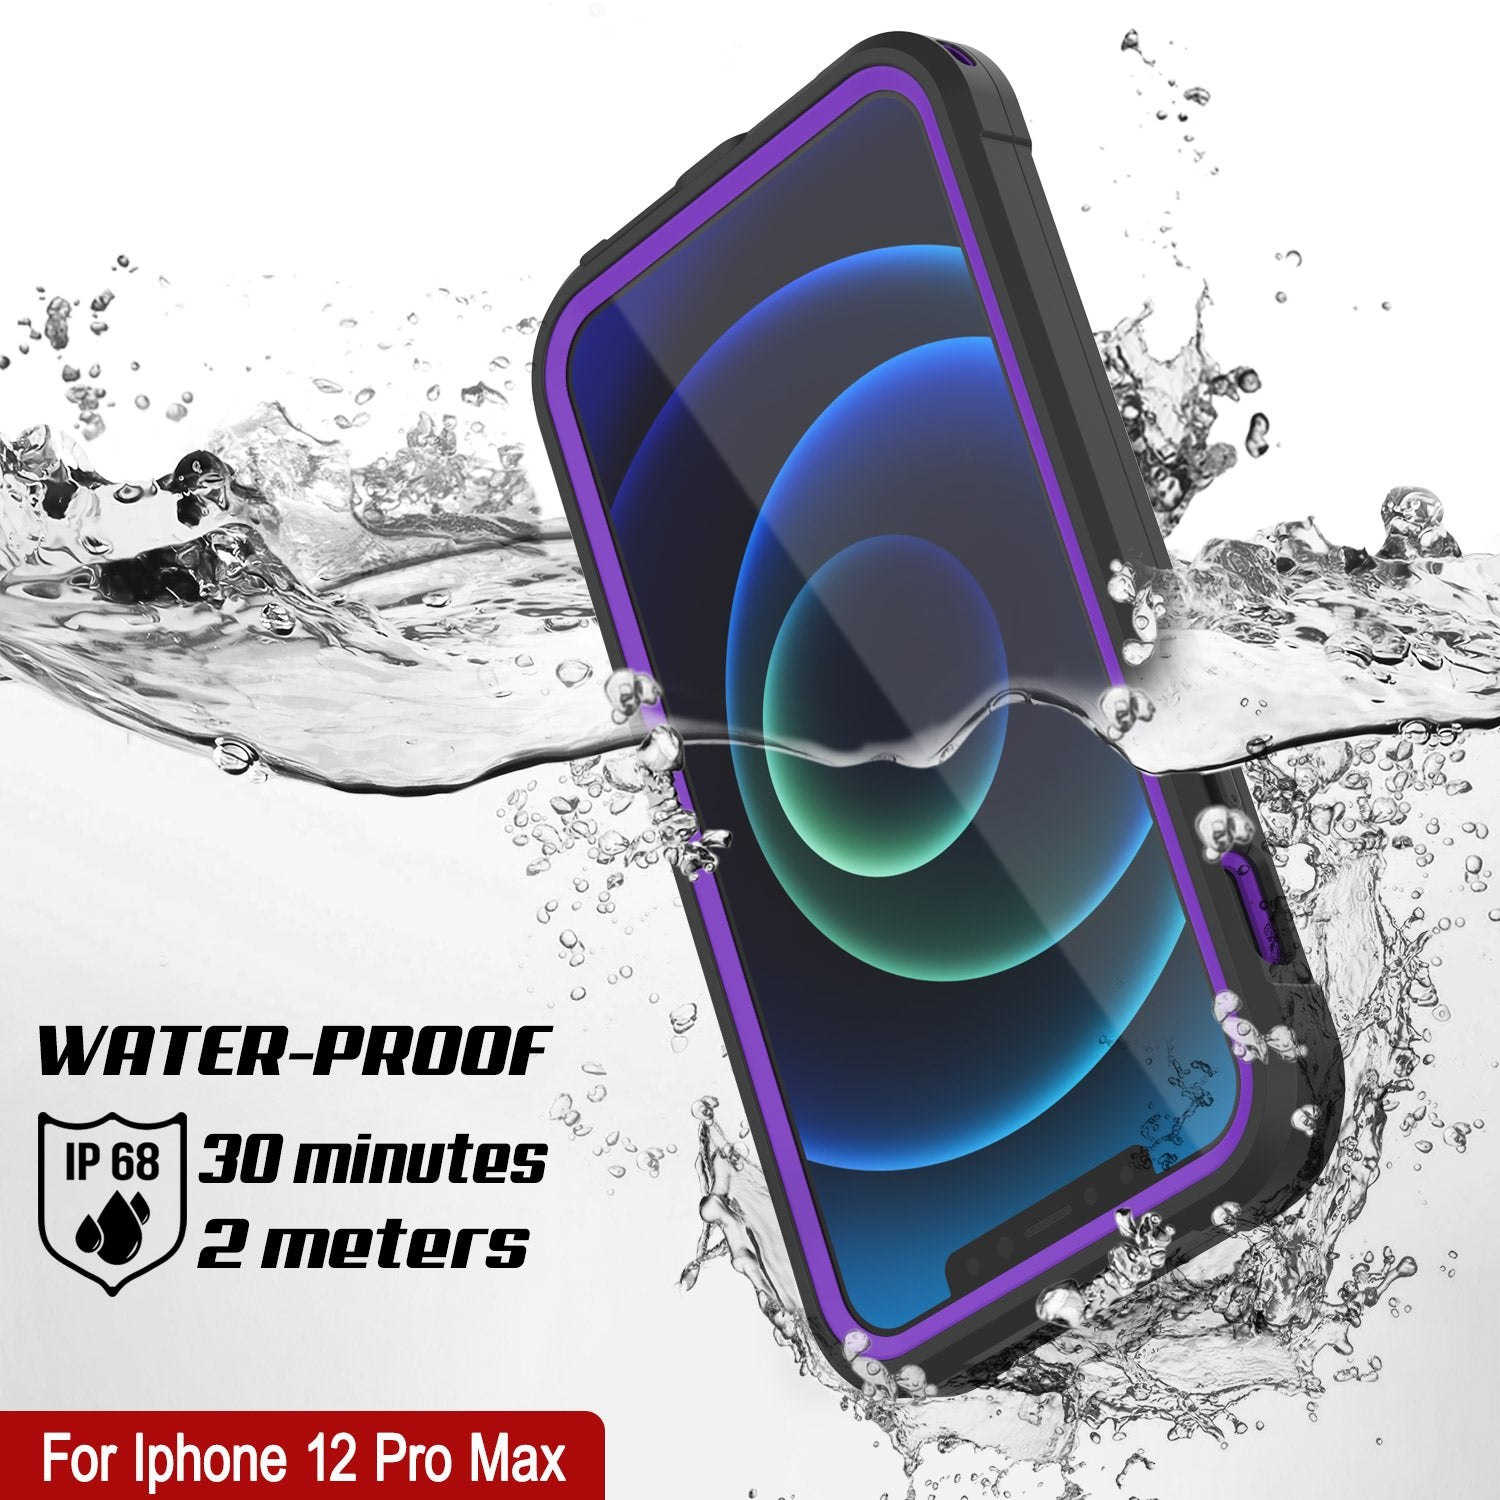 iPhone 12 Pro Max Waterproof IP68 Case, Punkcase [Purple]  [Maximus Series] [Slim Fit] [IP68 Certified] [Shockresistant] Clear Armor Cover with Screen Protector | Ultimate Protection